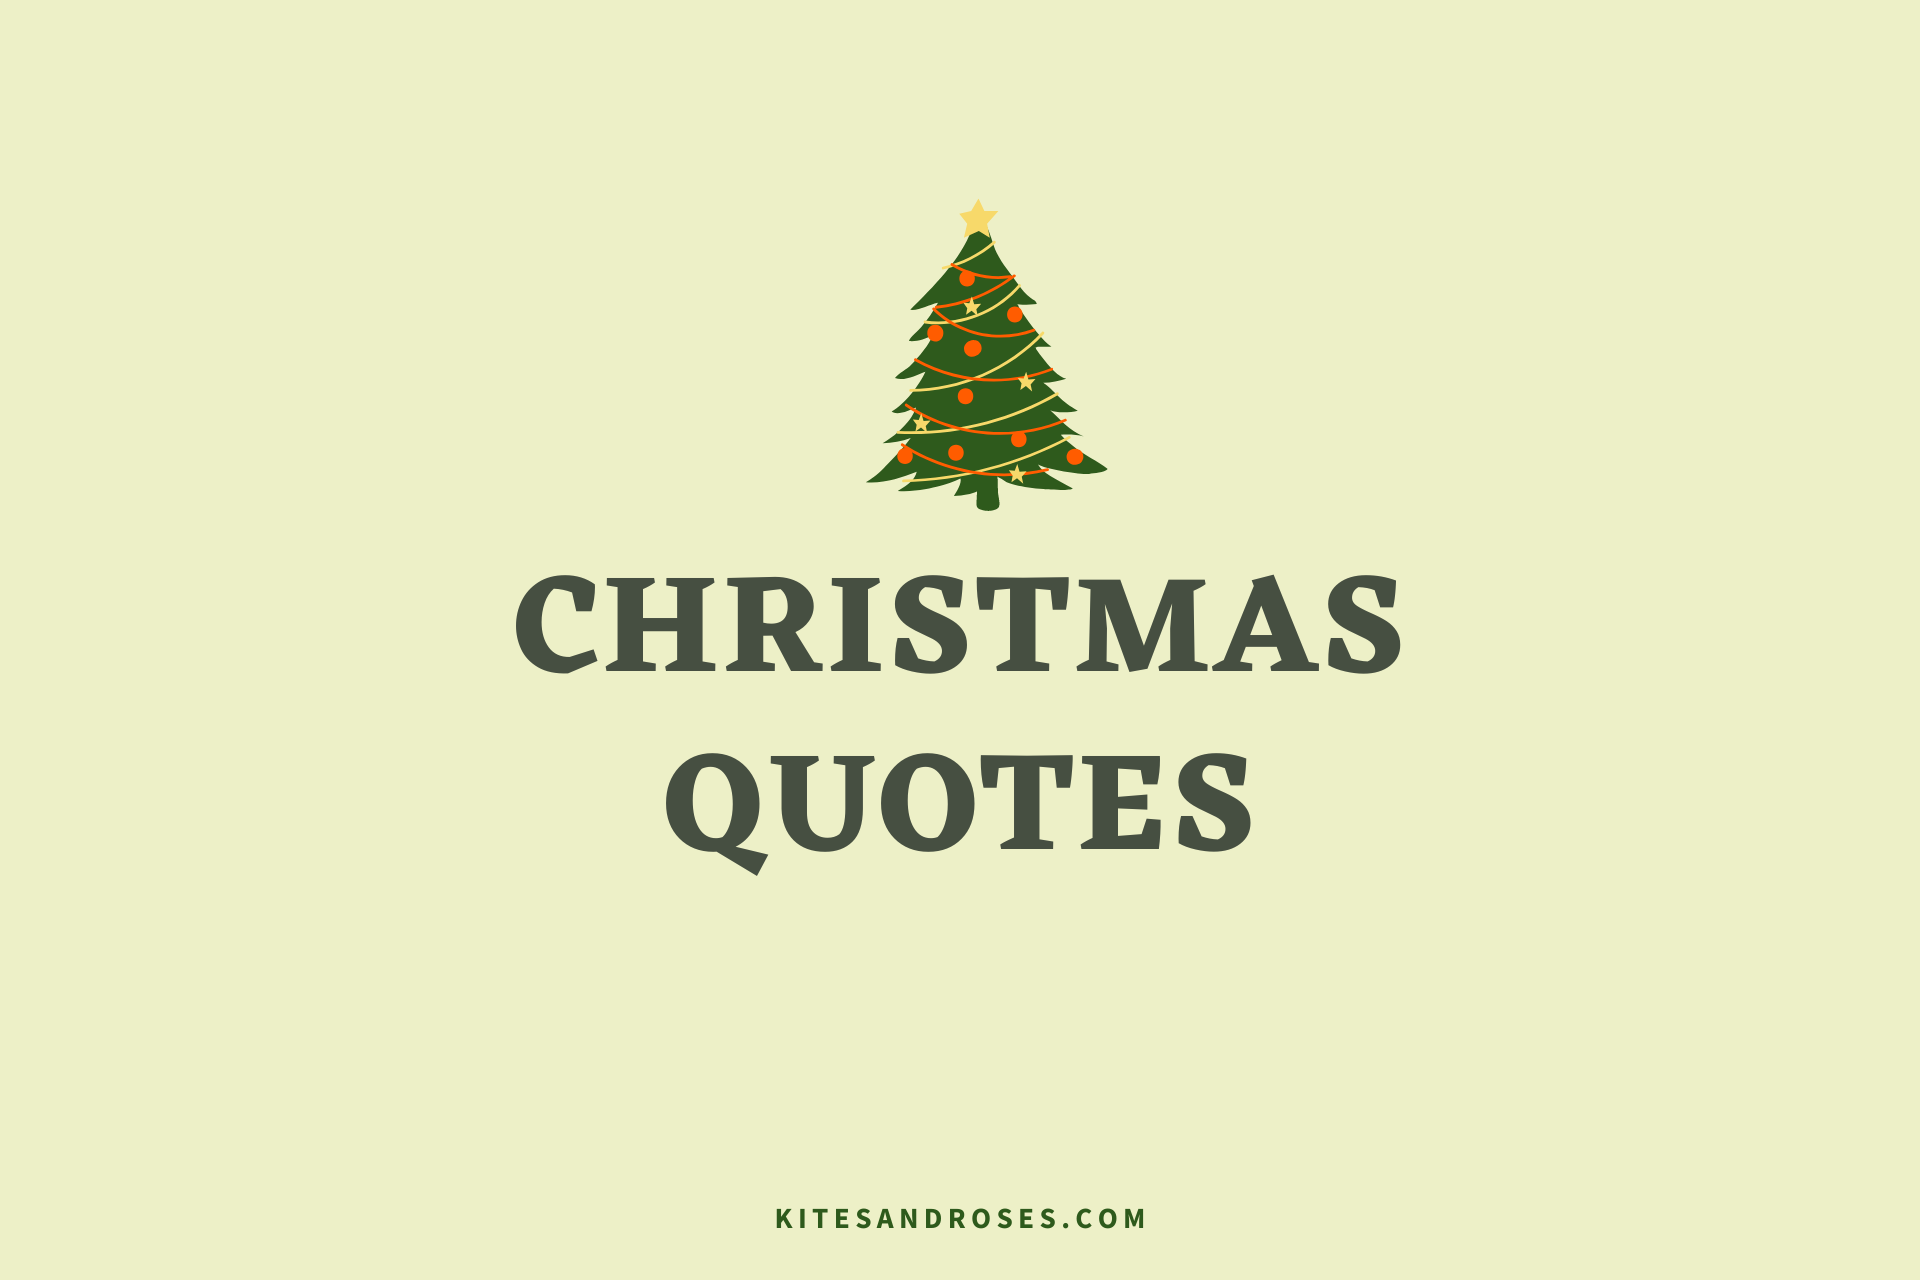 21+ Christmas Captions For Instagram [With Quotes] - Kites and Roses